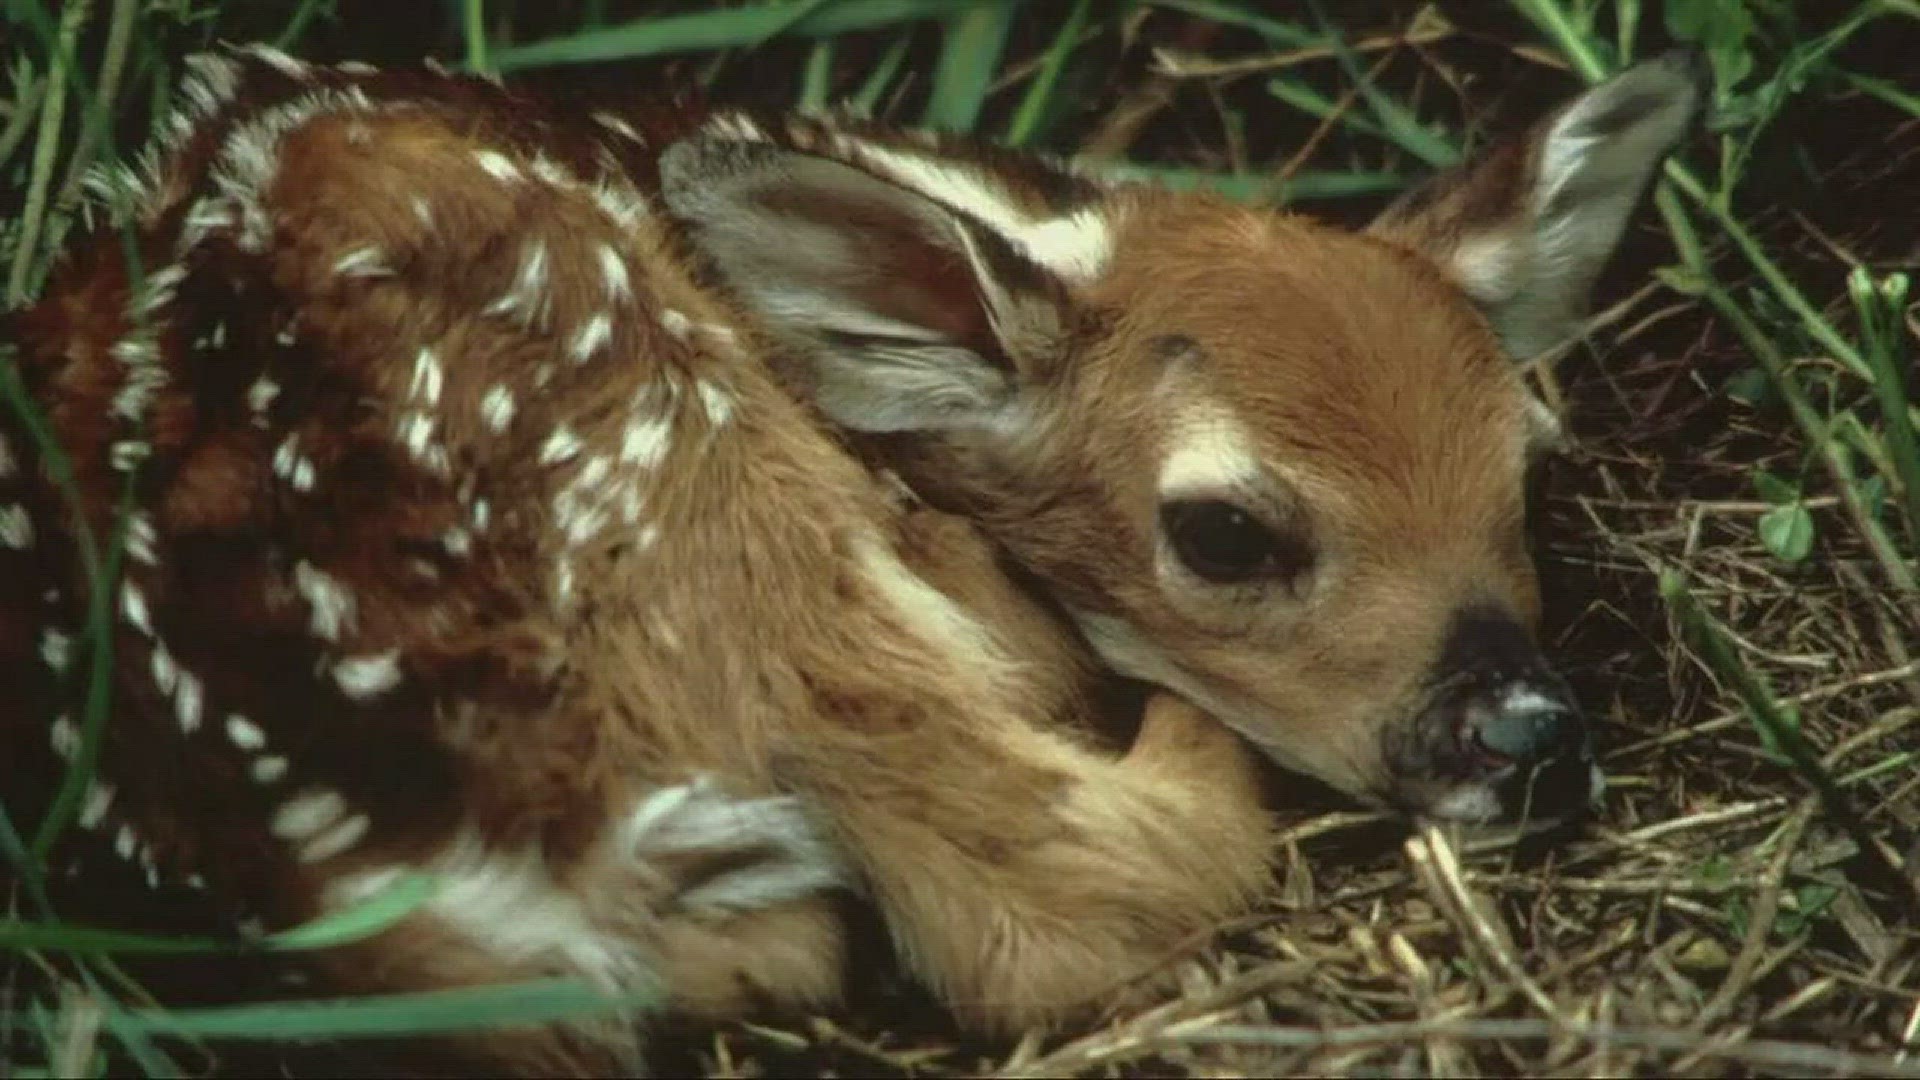 VERIFY | What to do if you find a baby deer 